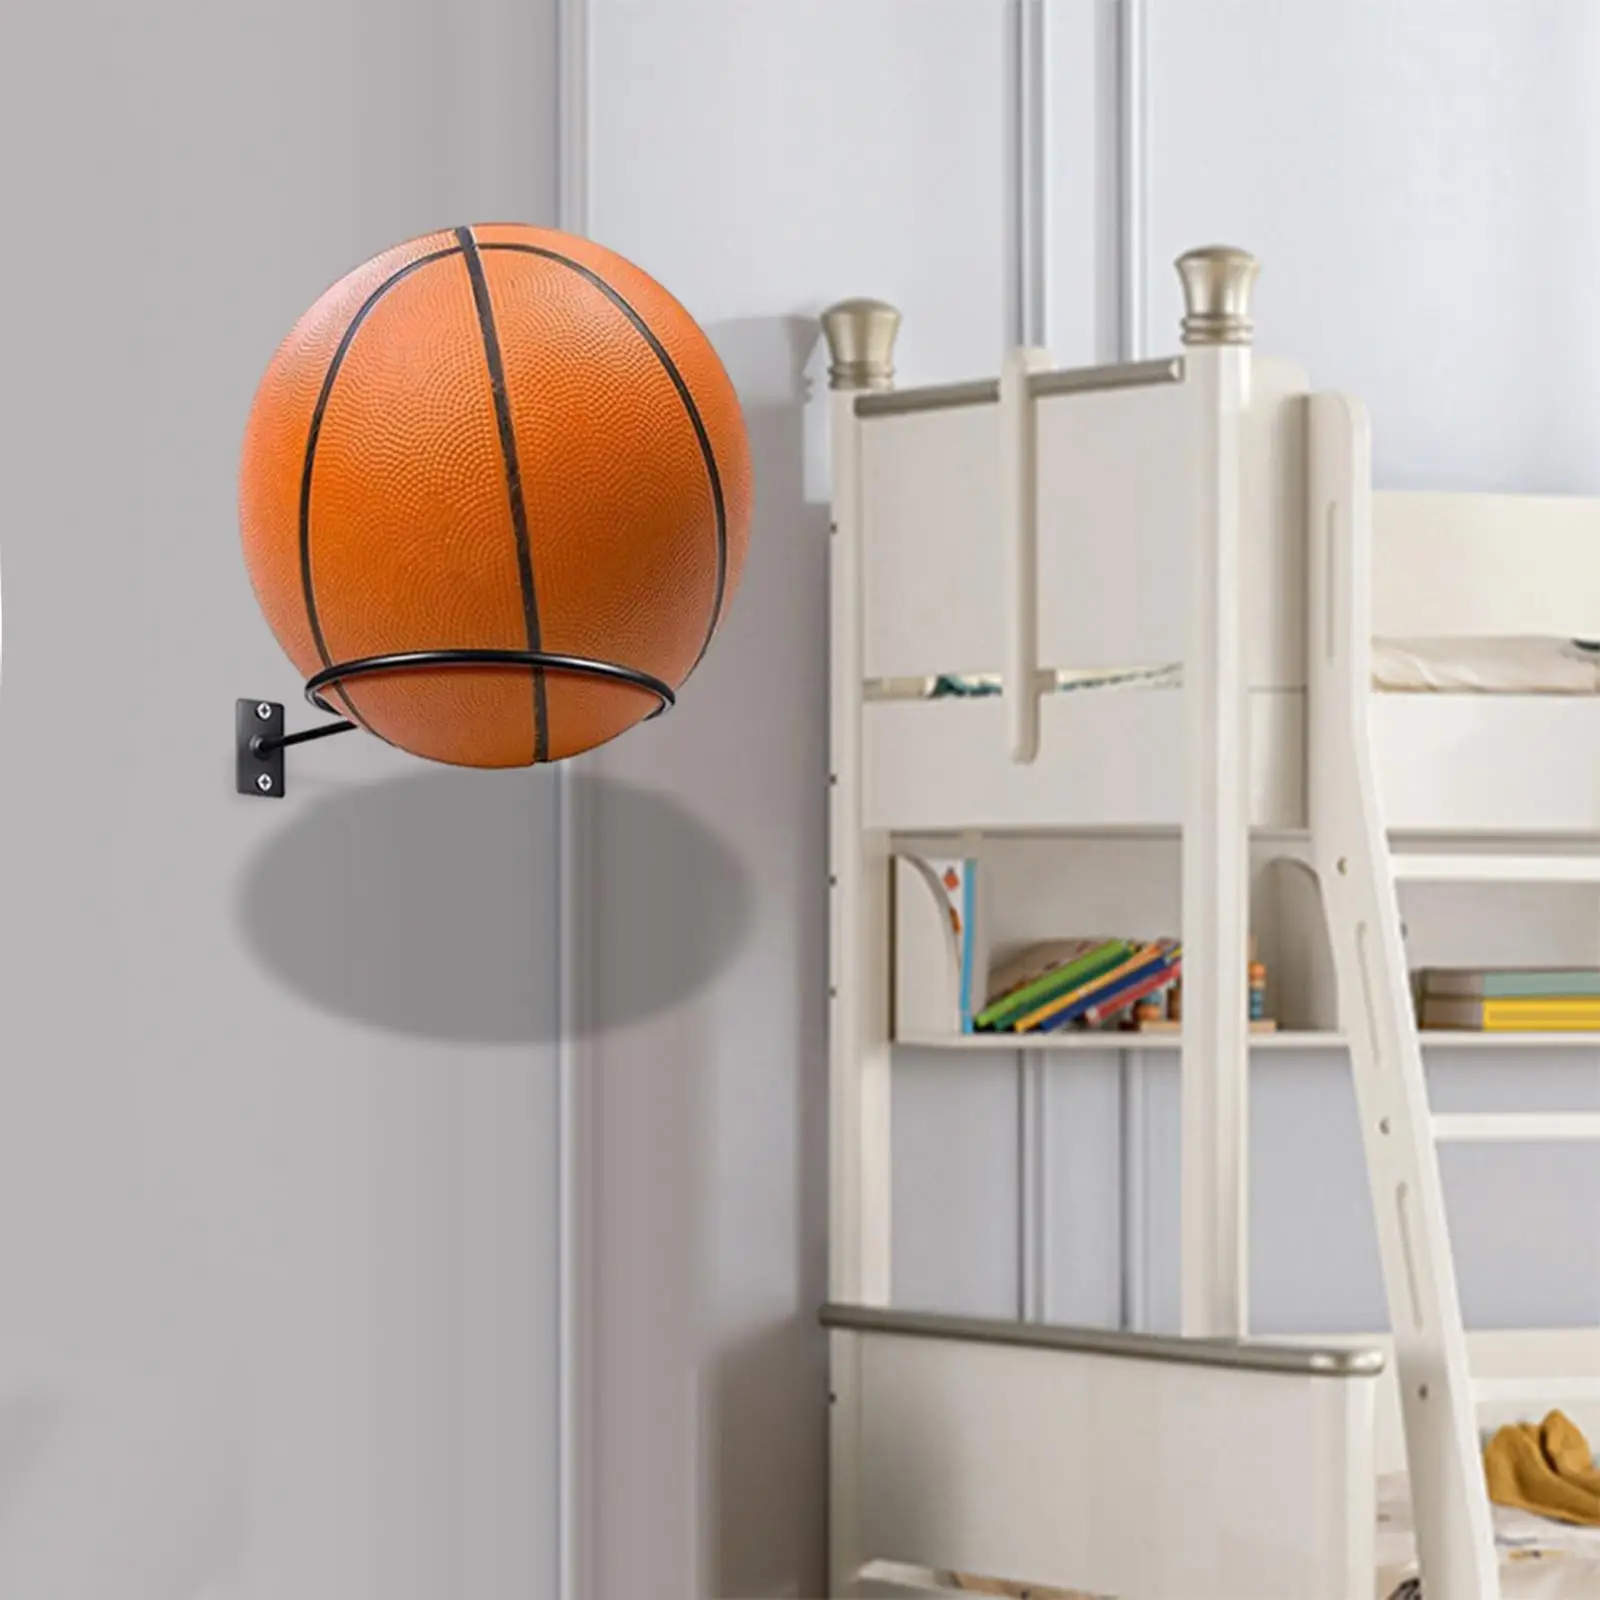 Sports Ball Holder Space Saving Organization Durable Basketball Display Stand for Volleyball Spheres Basketball Equipment